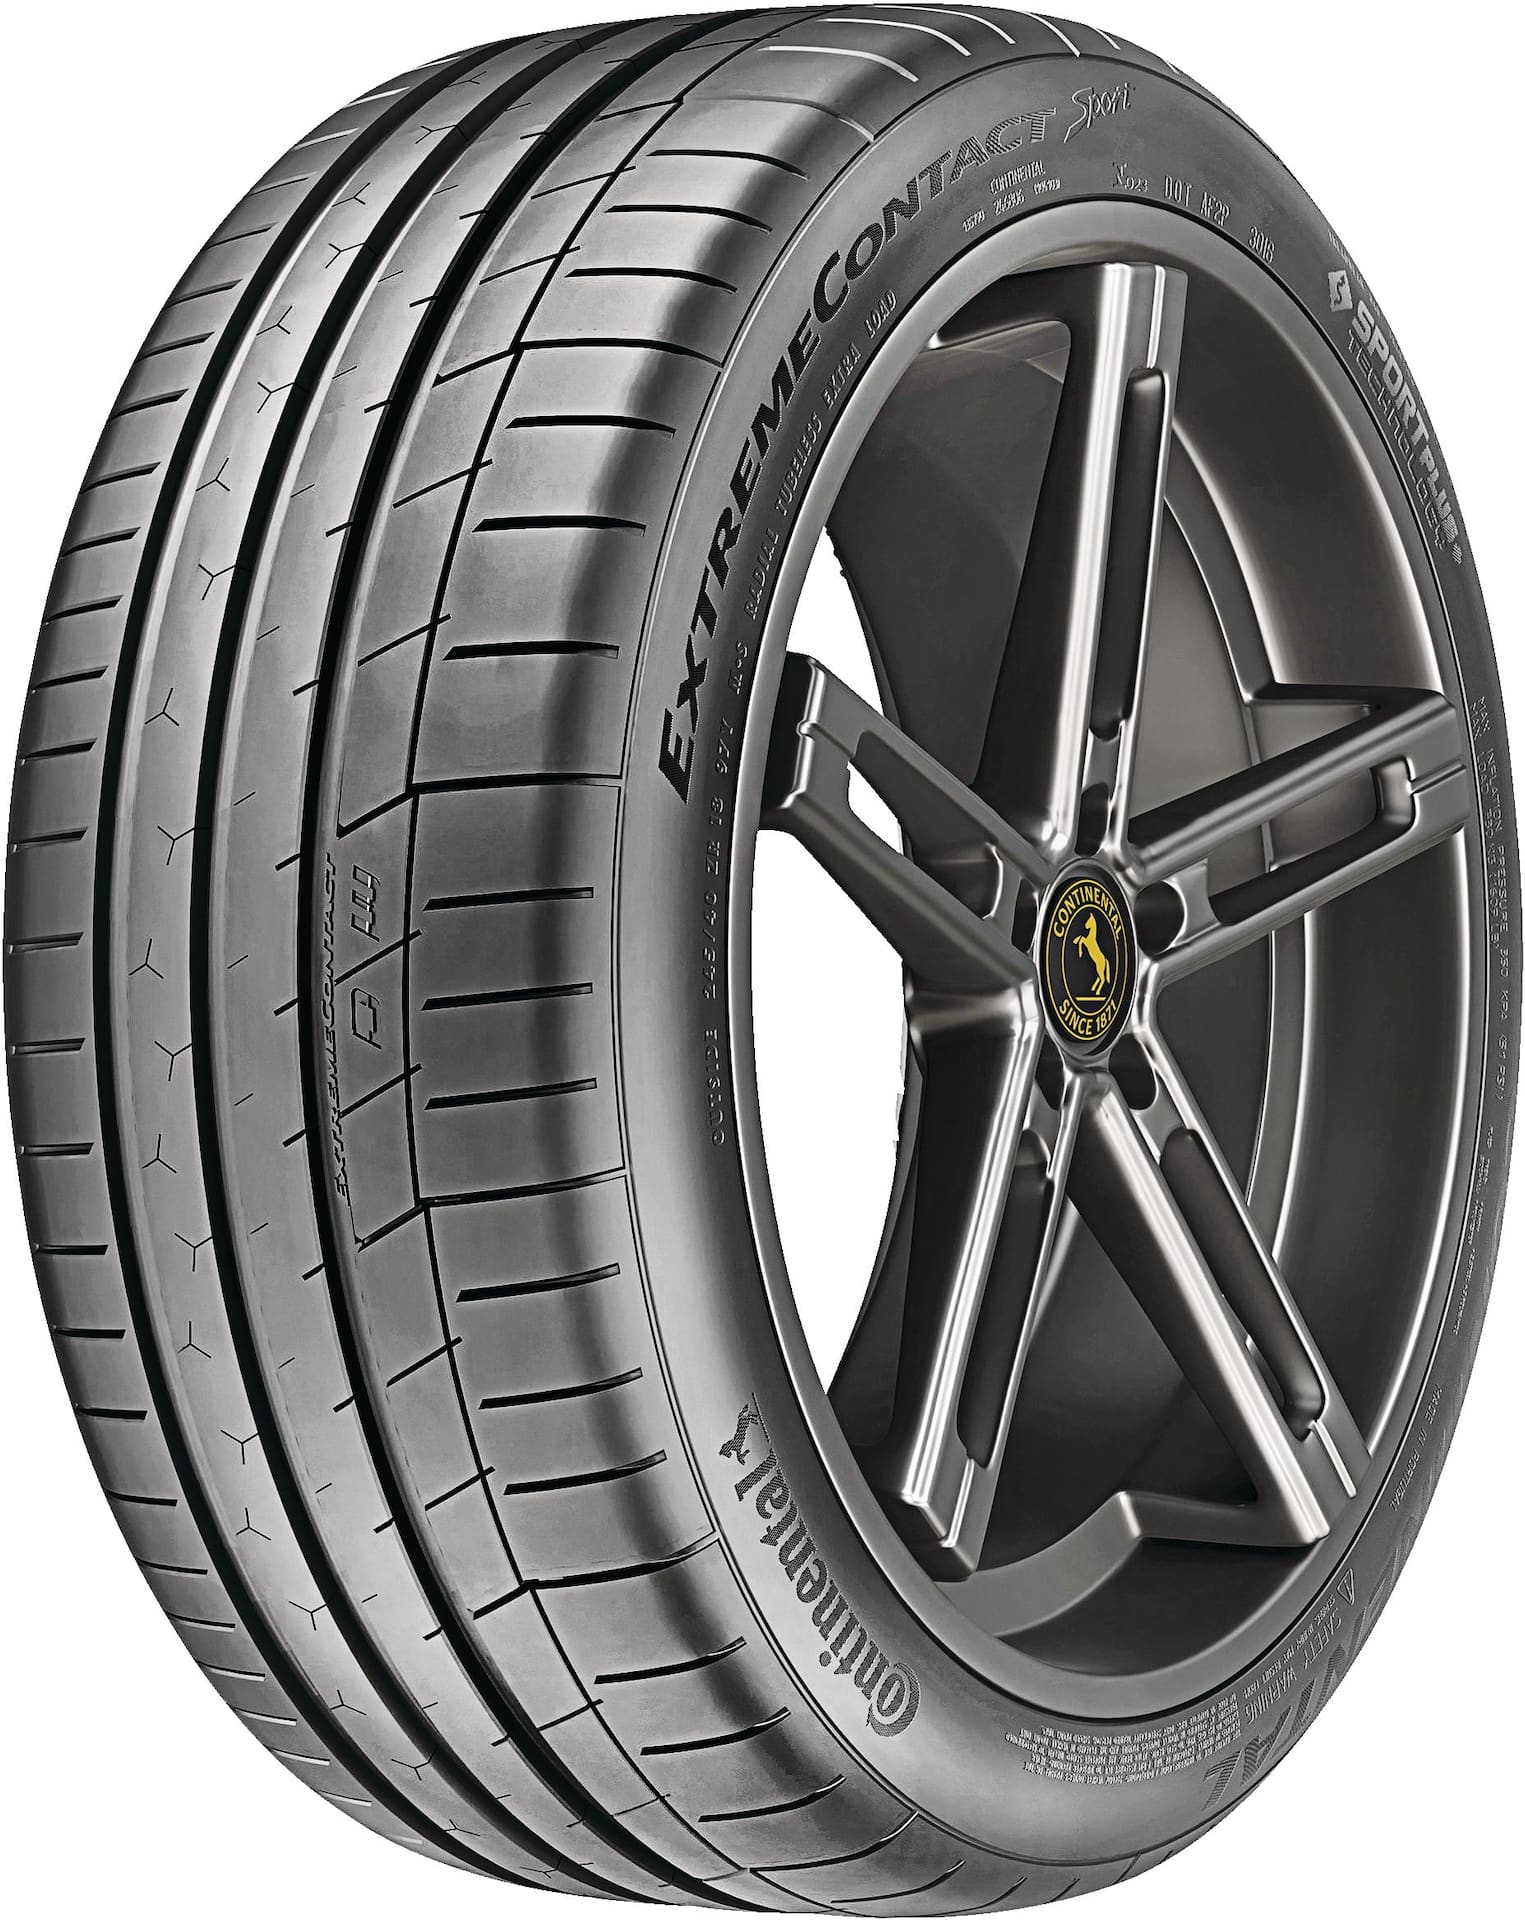 Continental Extreme Contact Sport Performance Tire